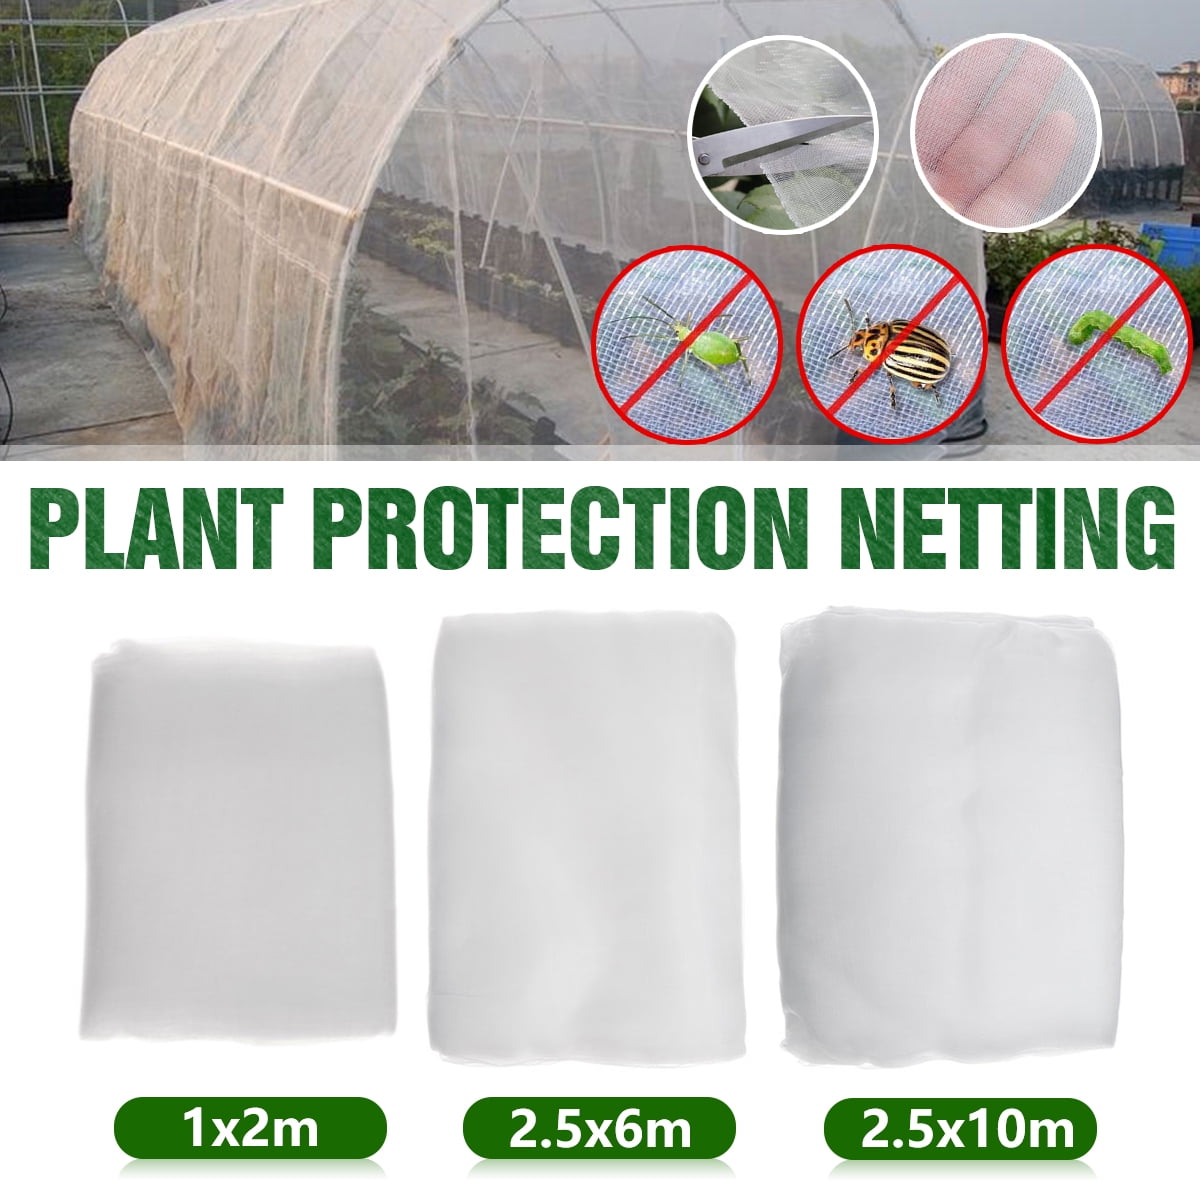 Details about   Plant Insect Proof Net Garden Protection Insect Proof Barrier Draws Net Q5Y4 